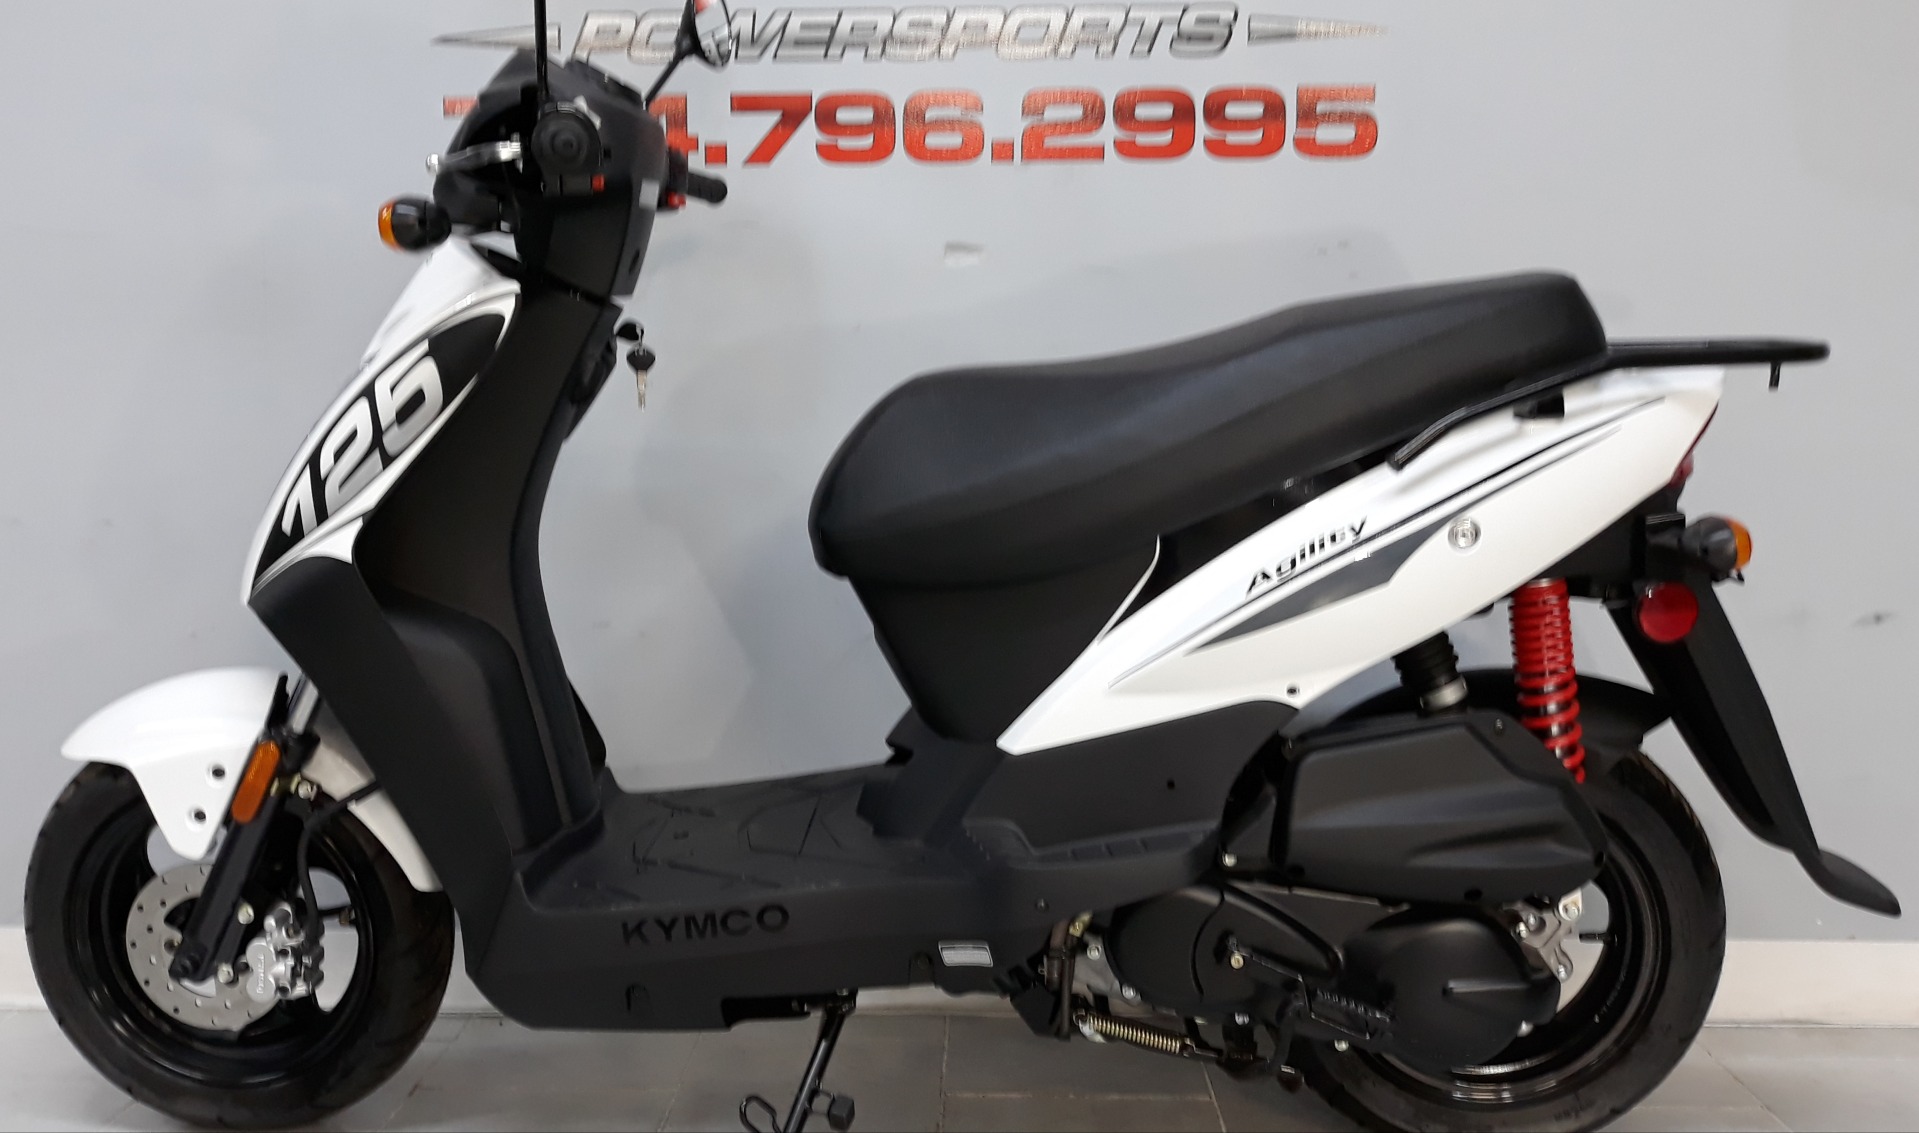 2022 Kymco Agility 125 in Belleville, Michigan - Photo 24